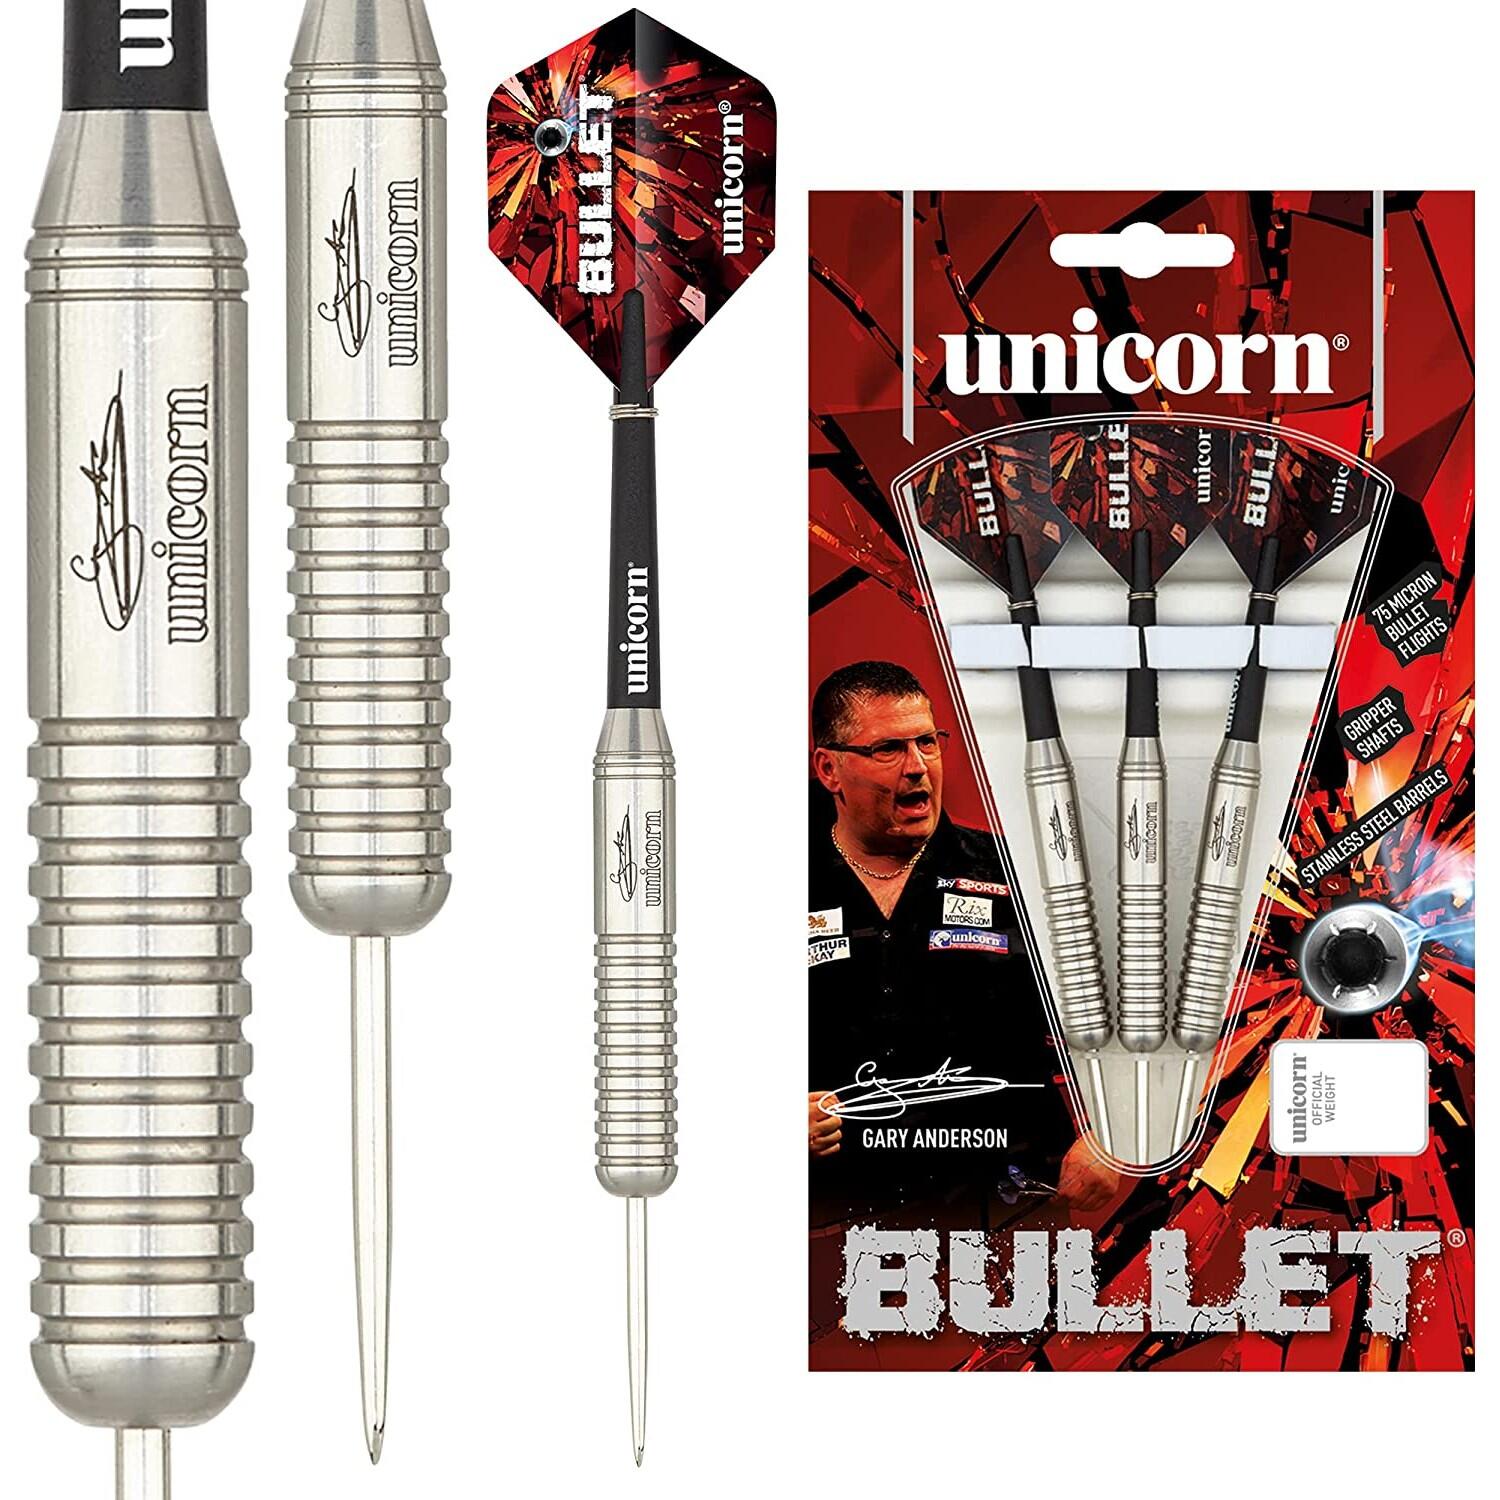 UNICORN Bullet Stainless Steel Darts (Pack of 3) (Silver/Black)